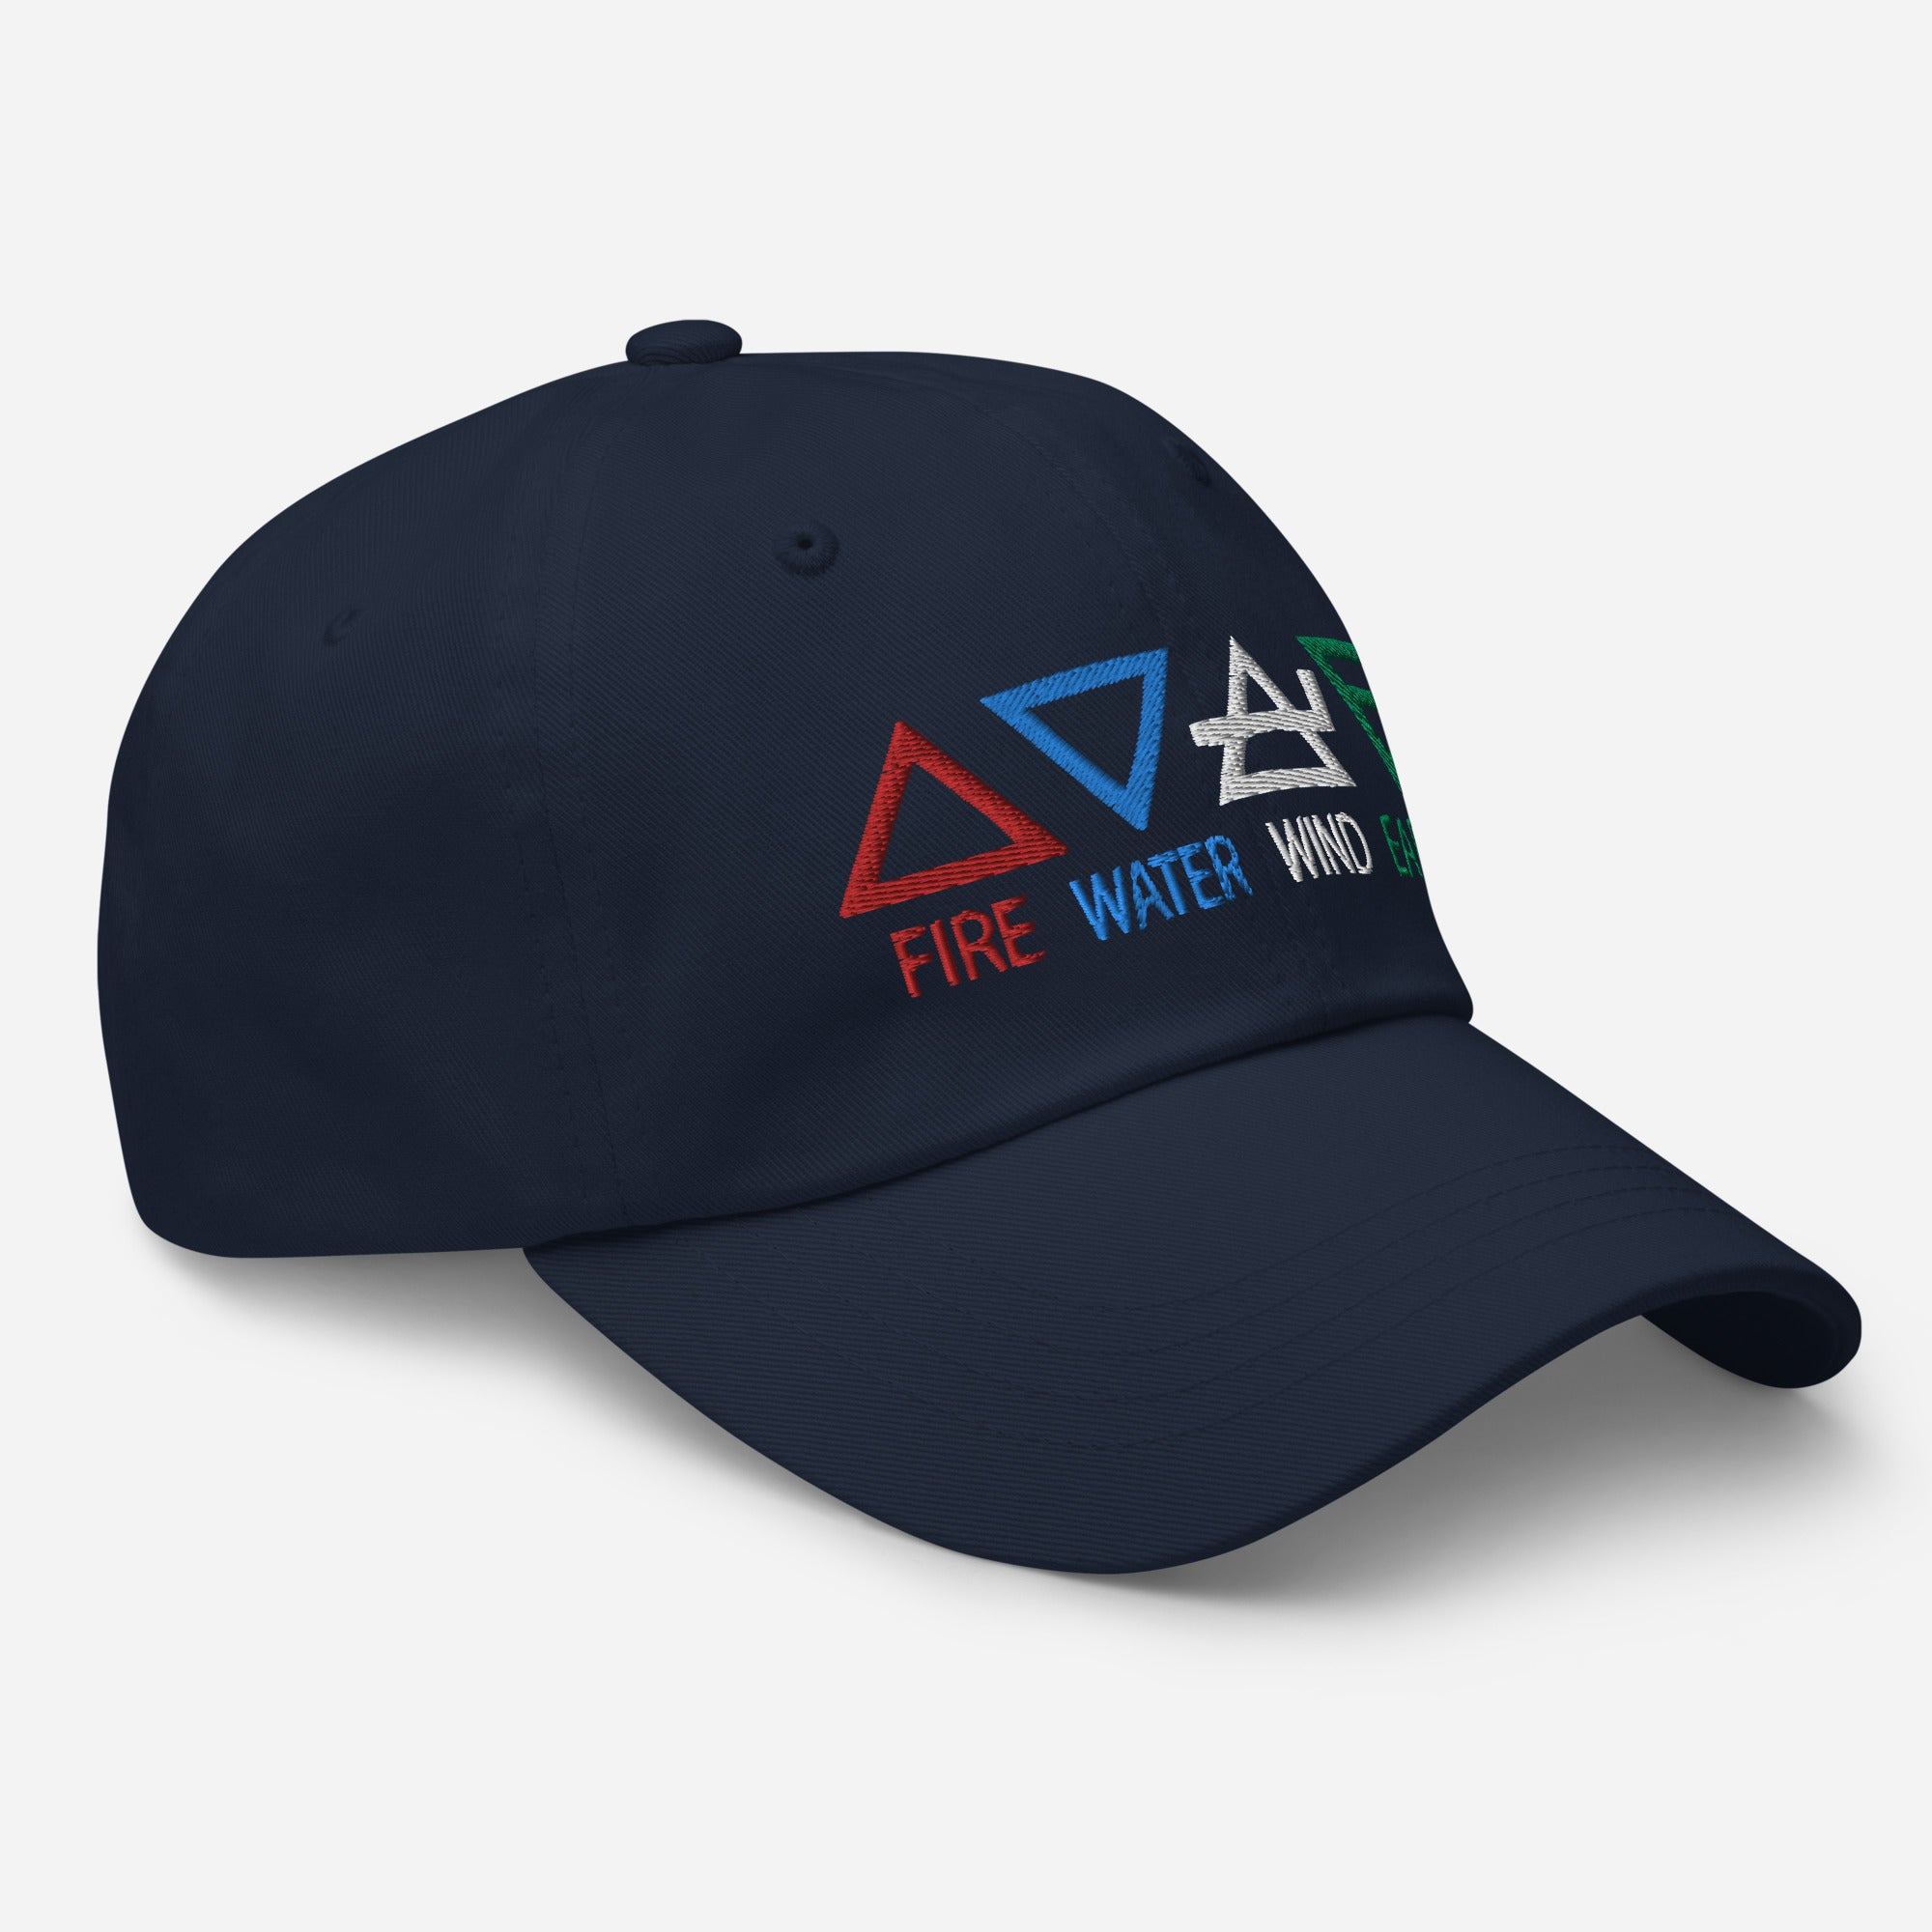 Four Elements of Matter: Fire, Water, Wind, Earth Embroidered Baseball Cap Dad hat